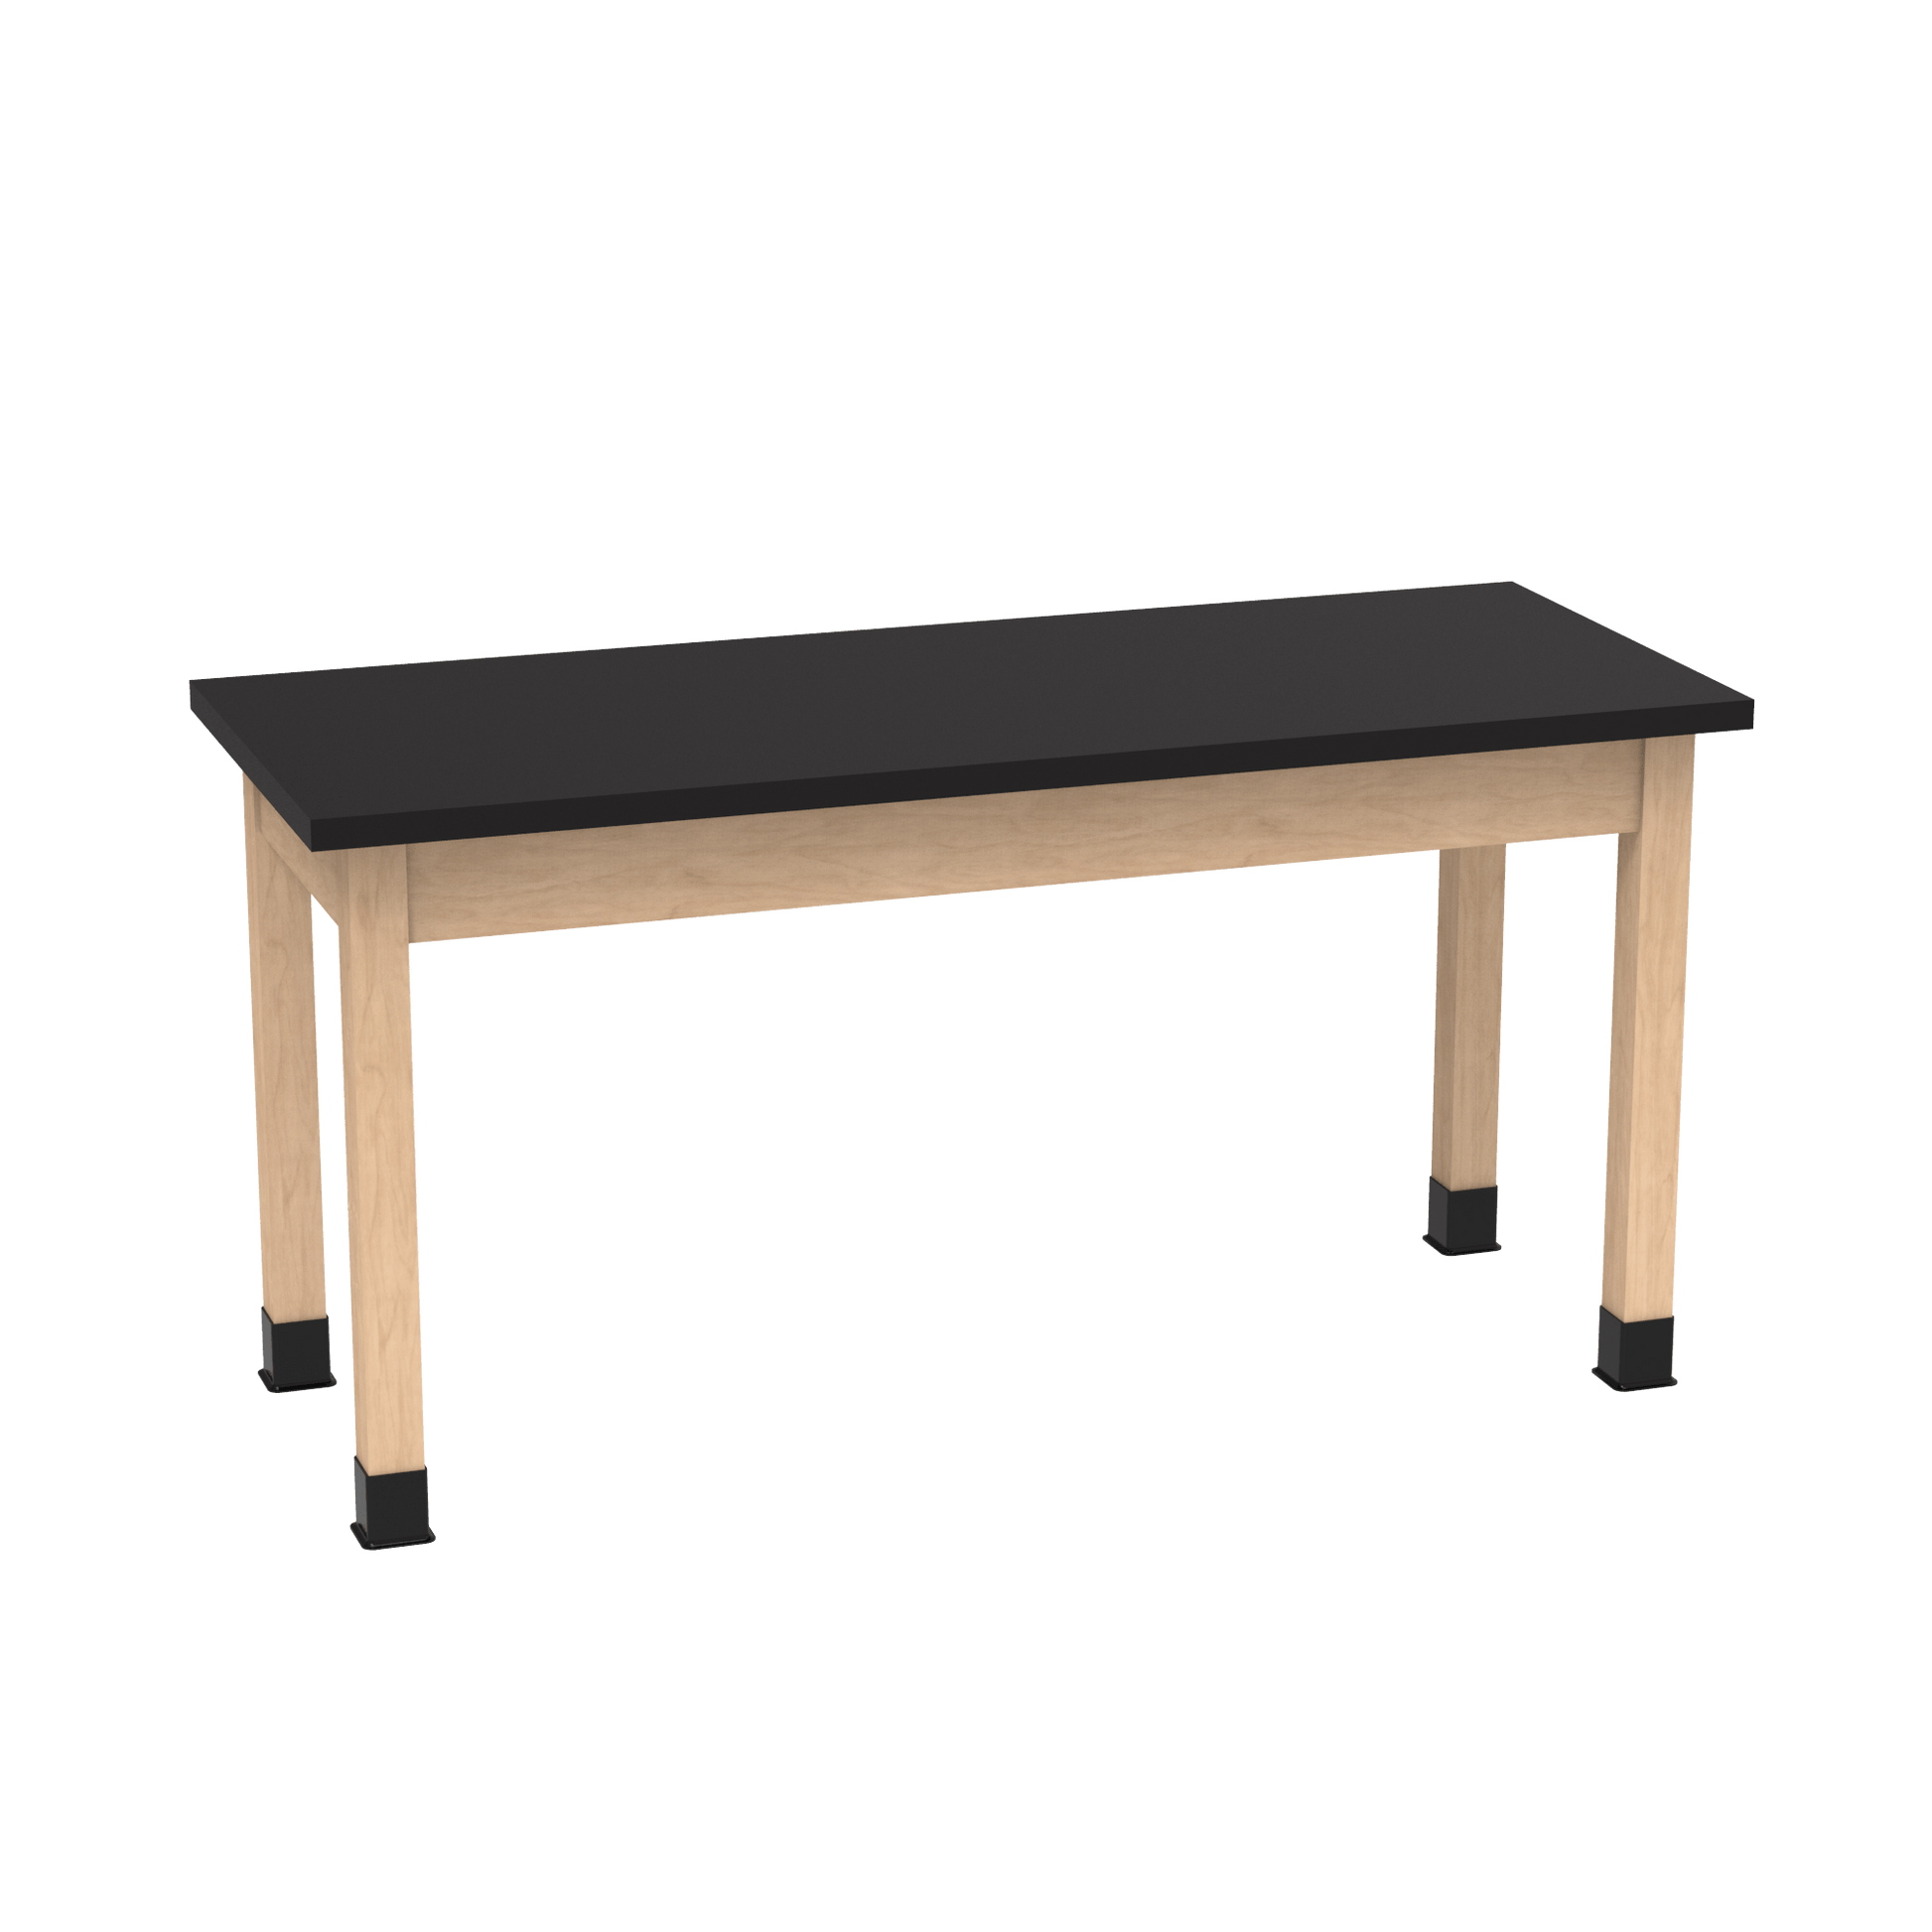 Diversified Woodcrafts Science Table - Plain Apron - 60" W x 30" D - Solid Wood Frame and Adjustable Glides - SchoolOutlet